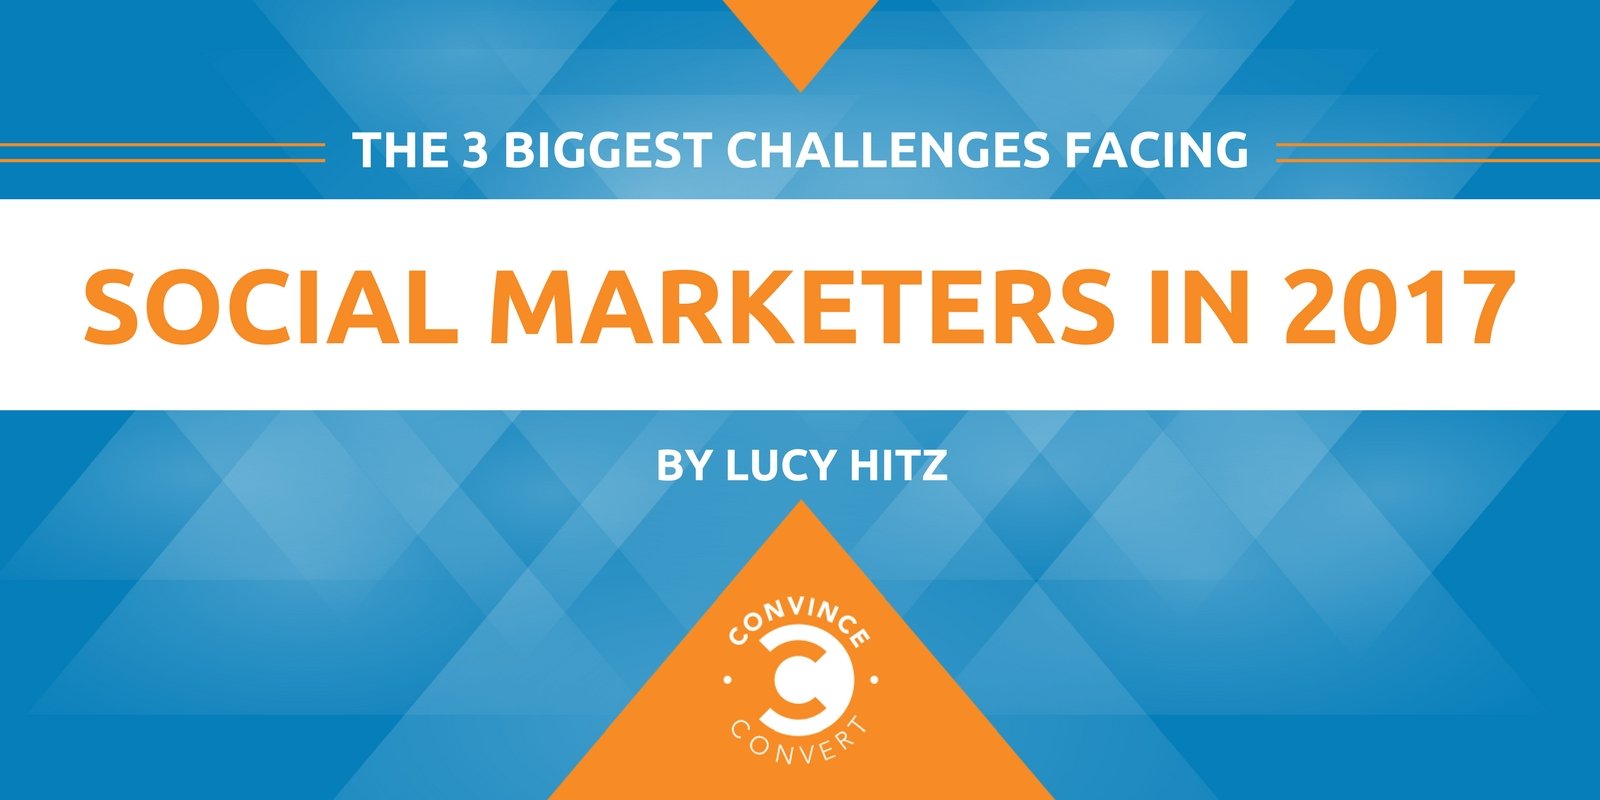 The 3 Biggest Challenges Facing Social Marketers in 2017